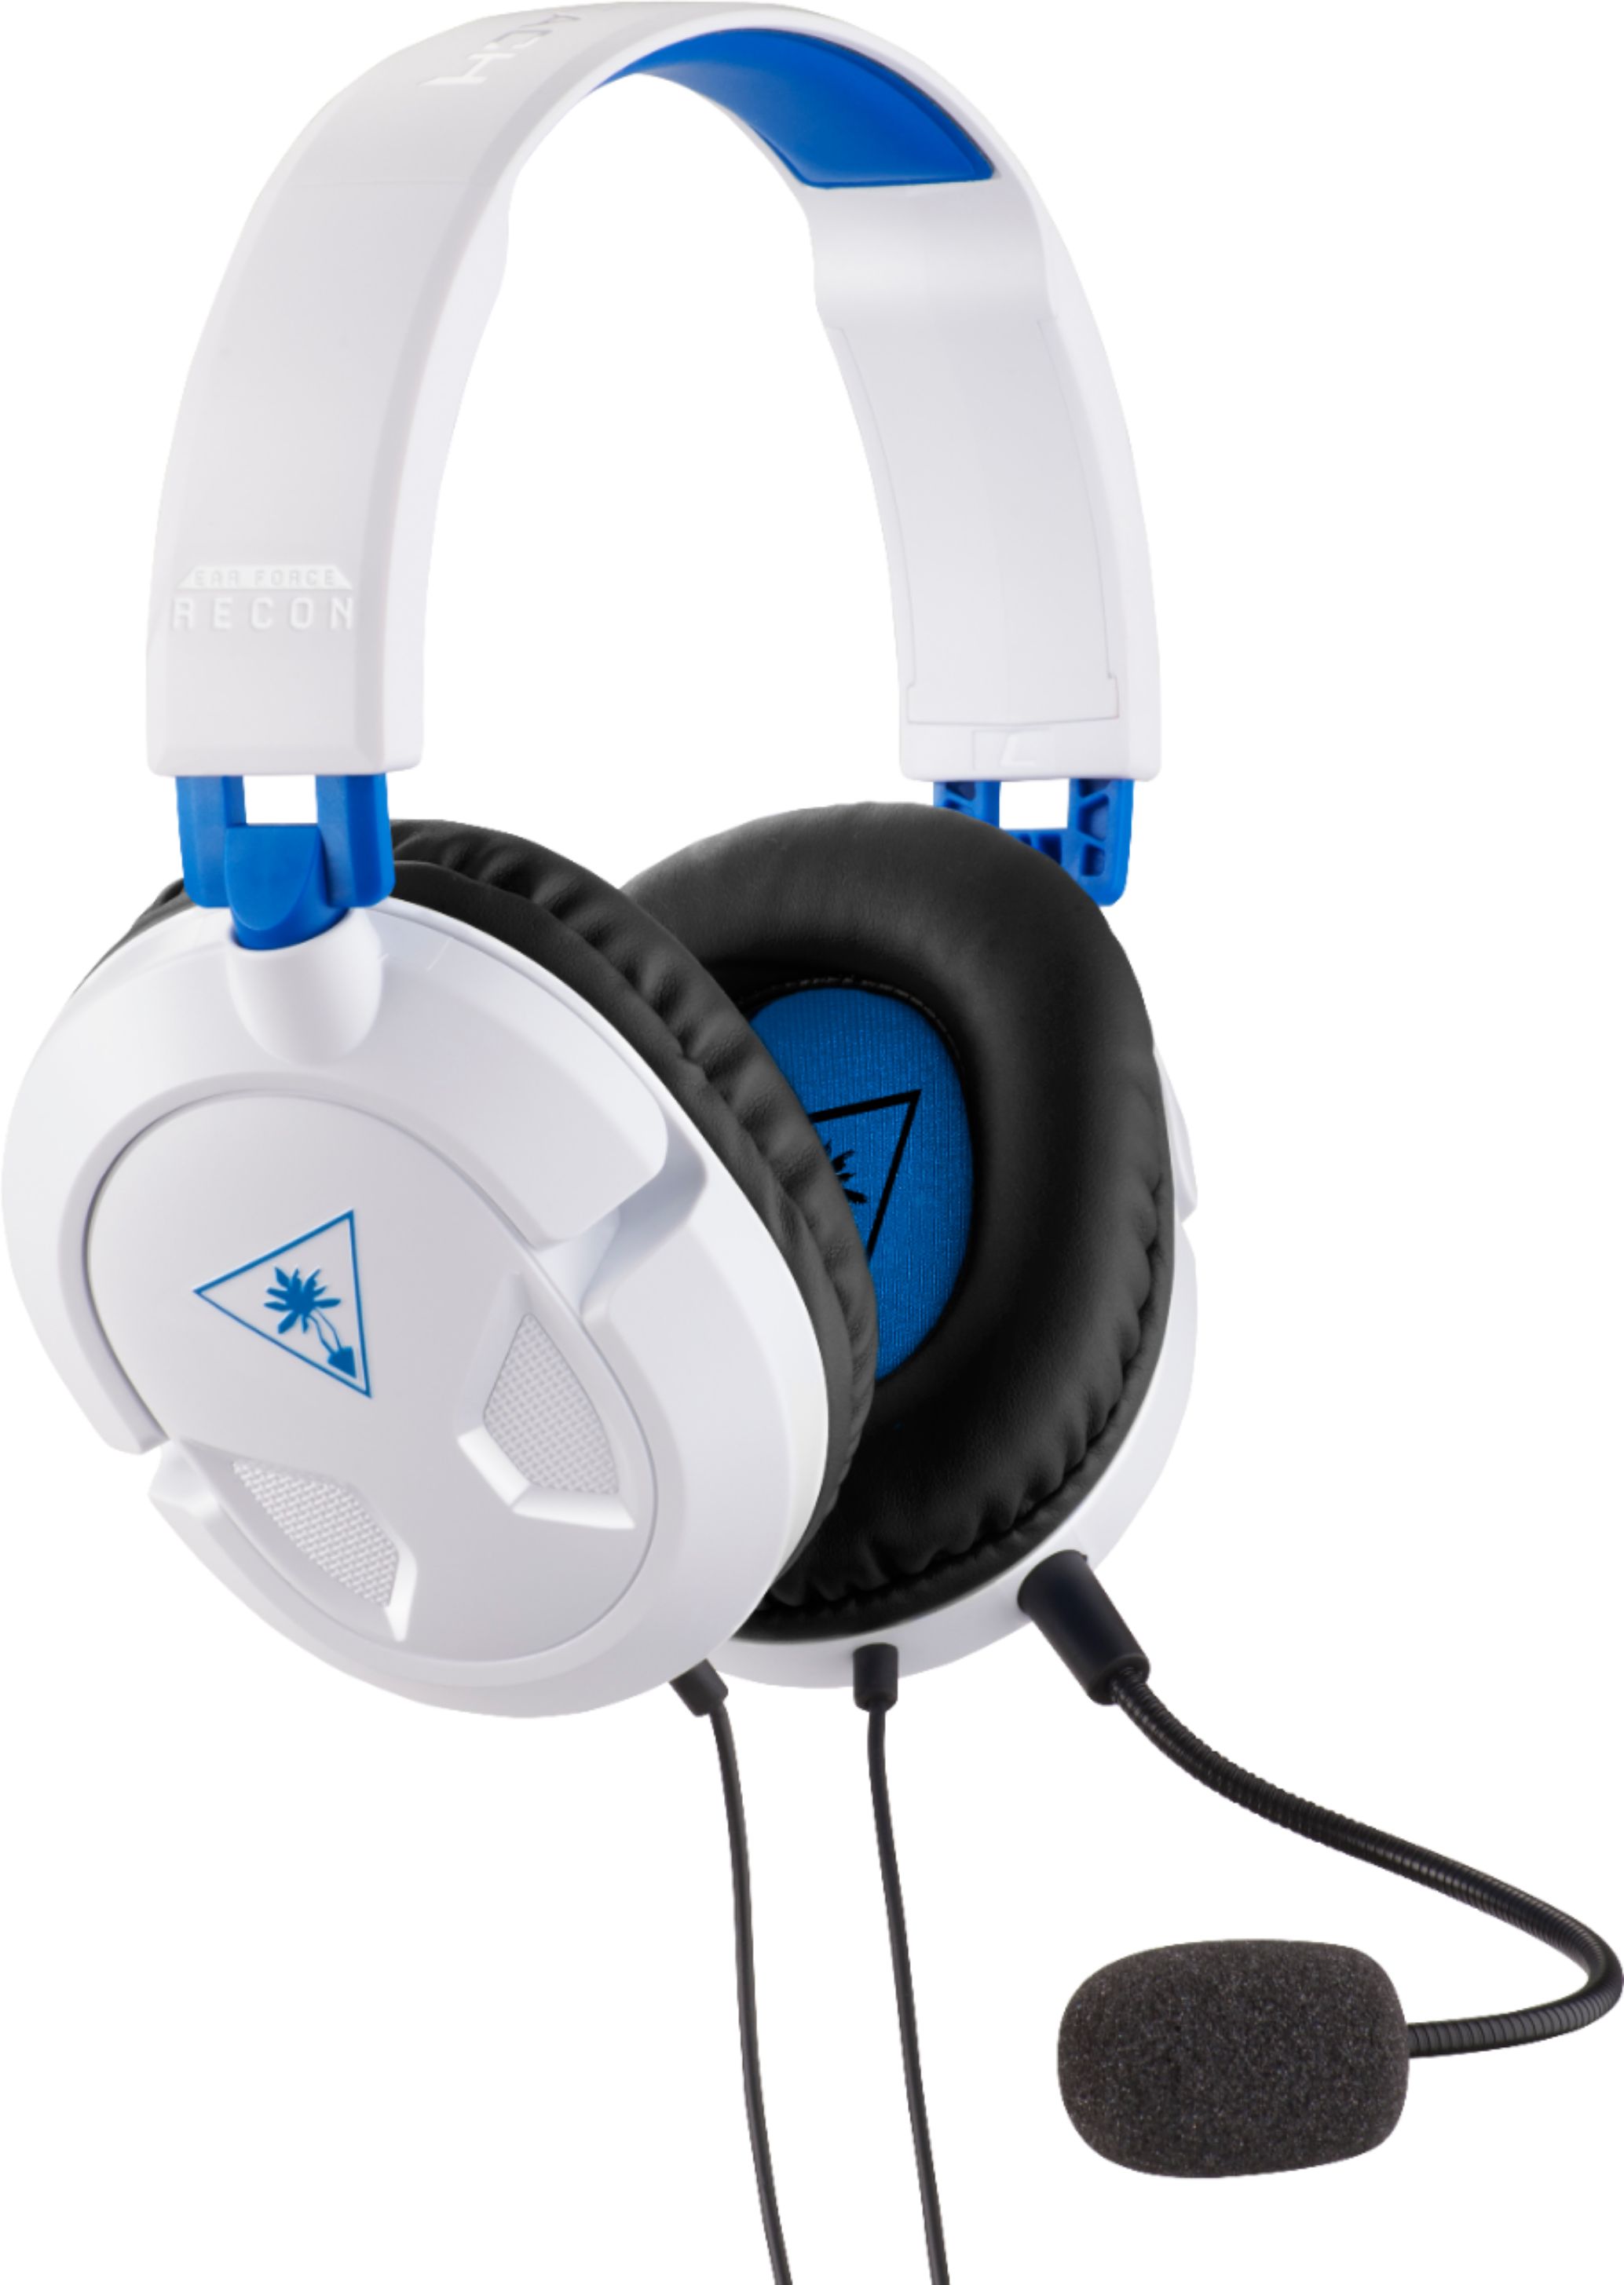 the best turtle beach headset for ps4